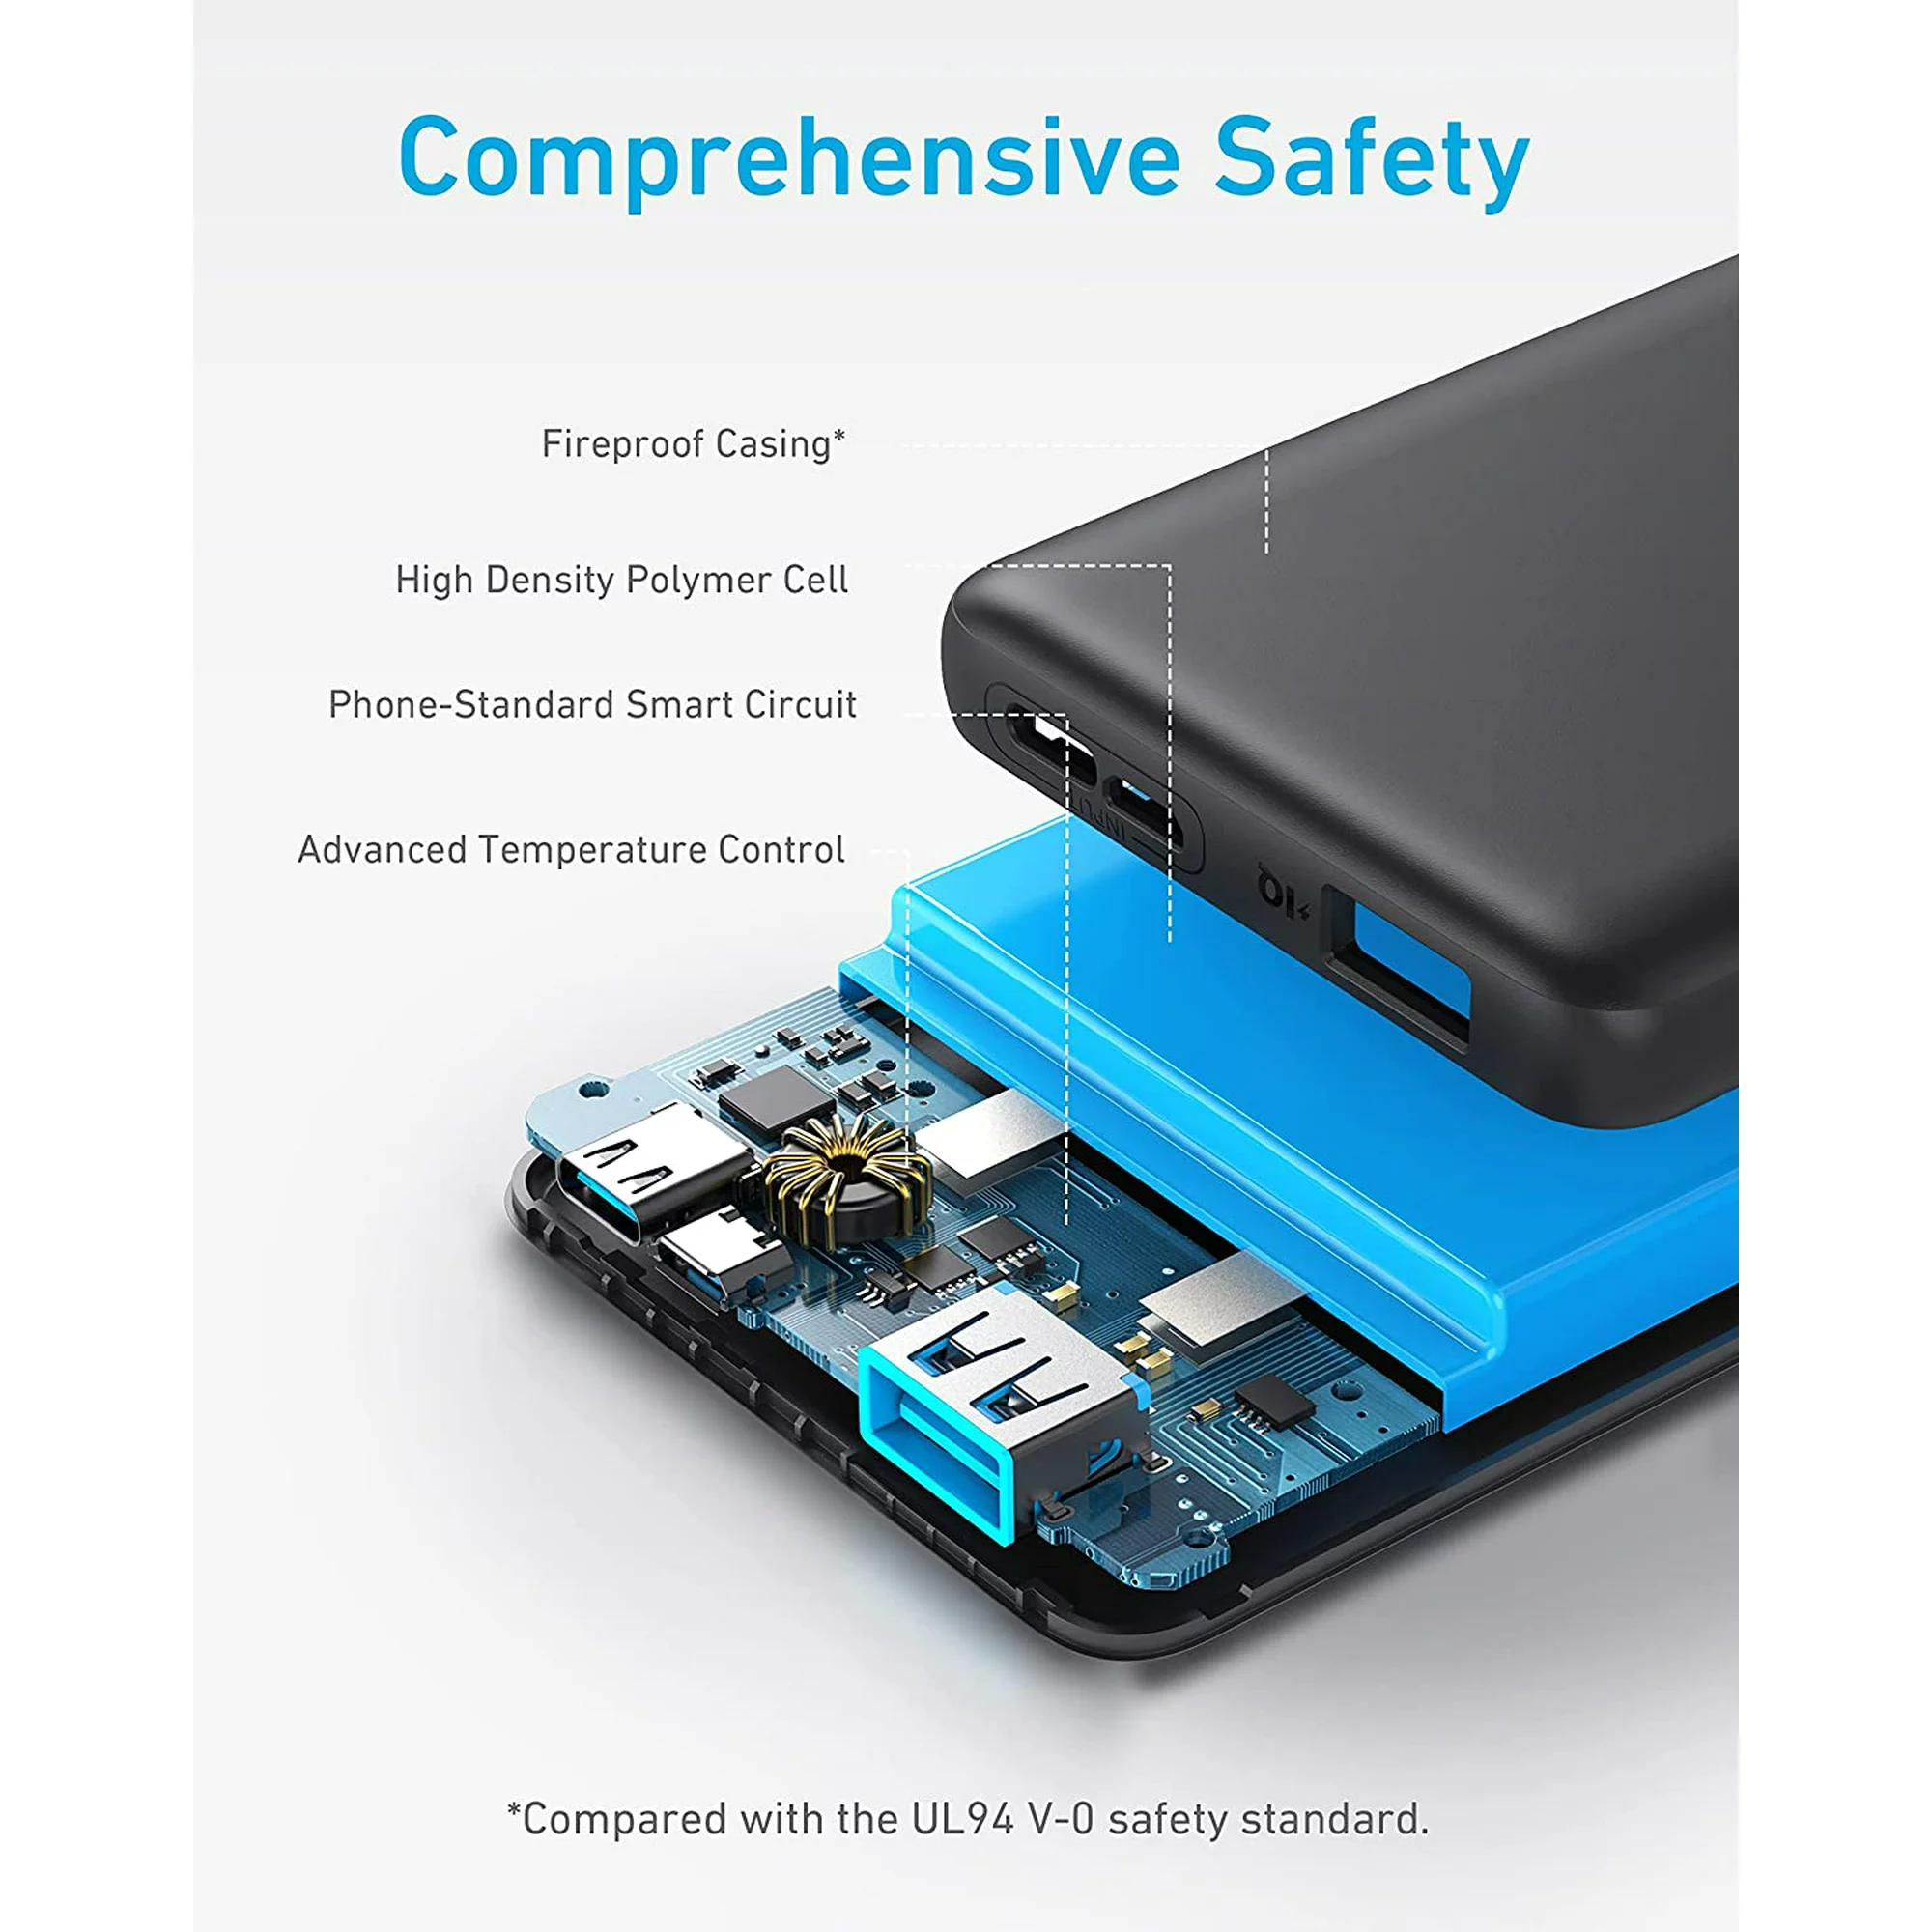 Anker Power Core 10000mAh Portable Charger - Comprehensive safety